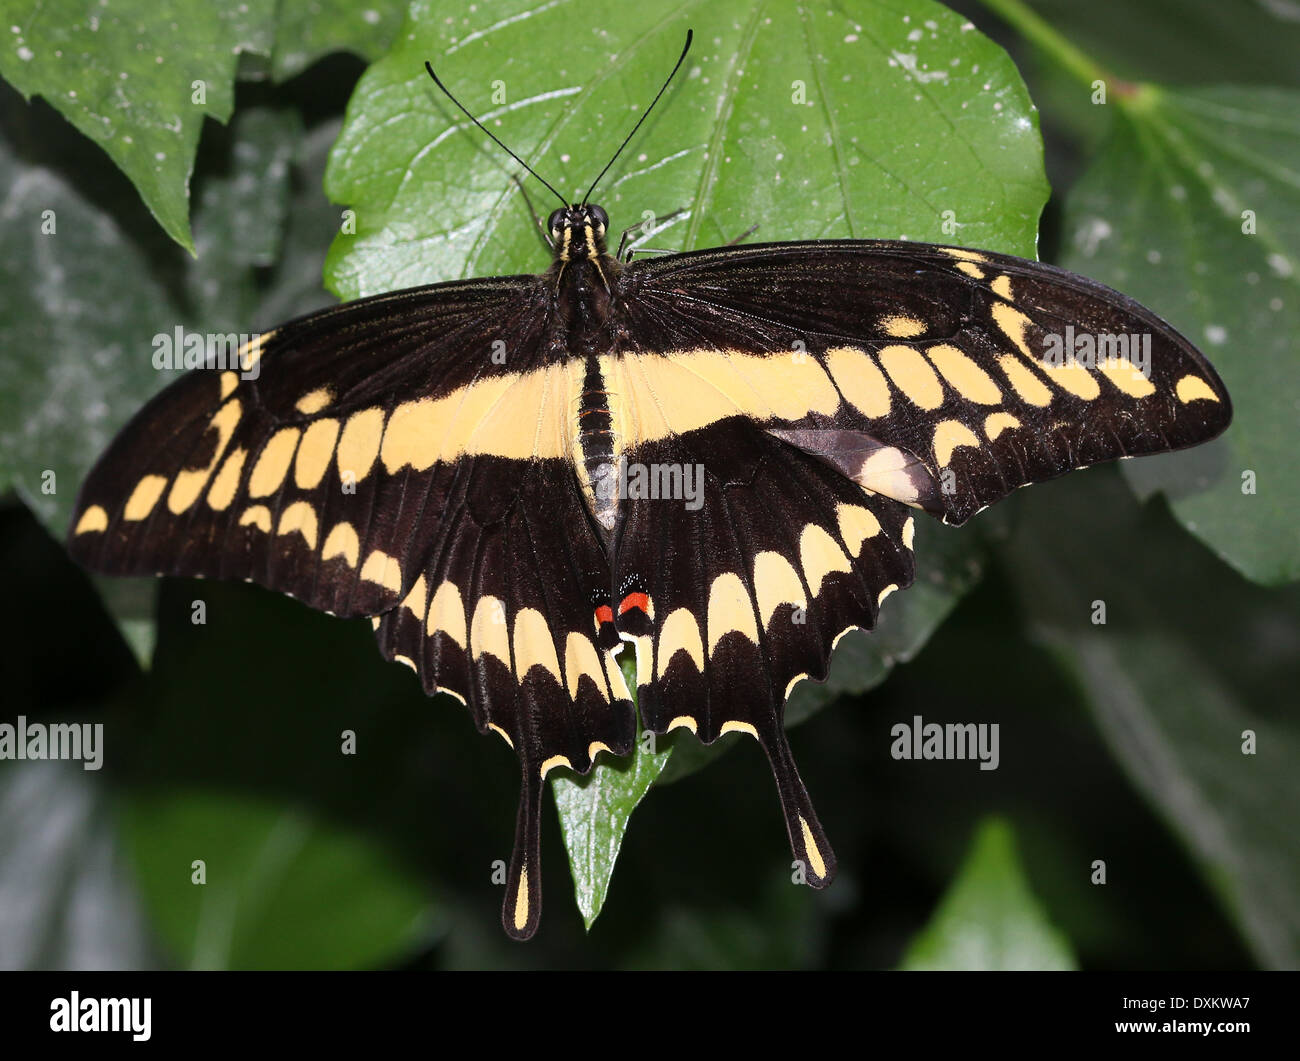 ONE REAL BUTTERFLY GIANT SWALLOWTAIL PAPILIO CRESPHONTES RUMIKO R WINGS CLOSED 